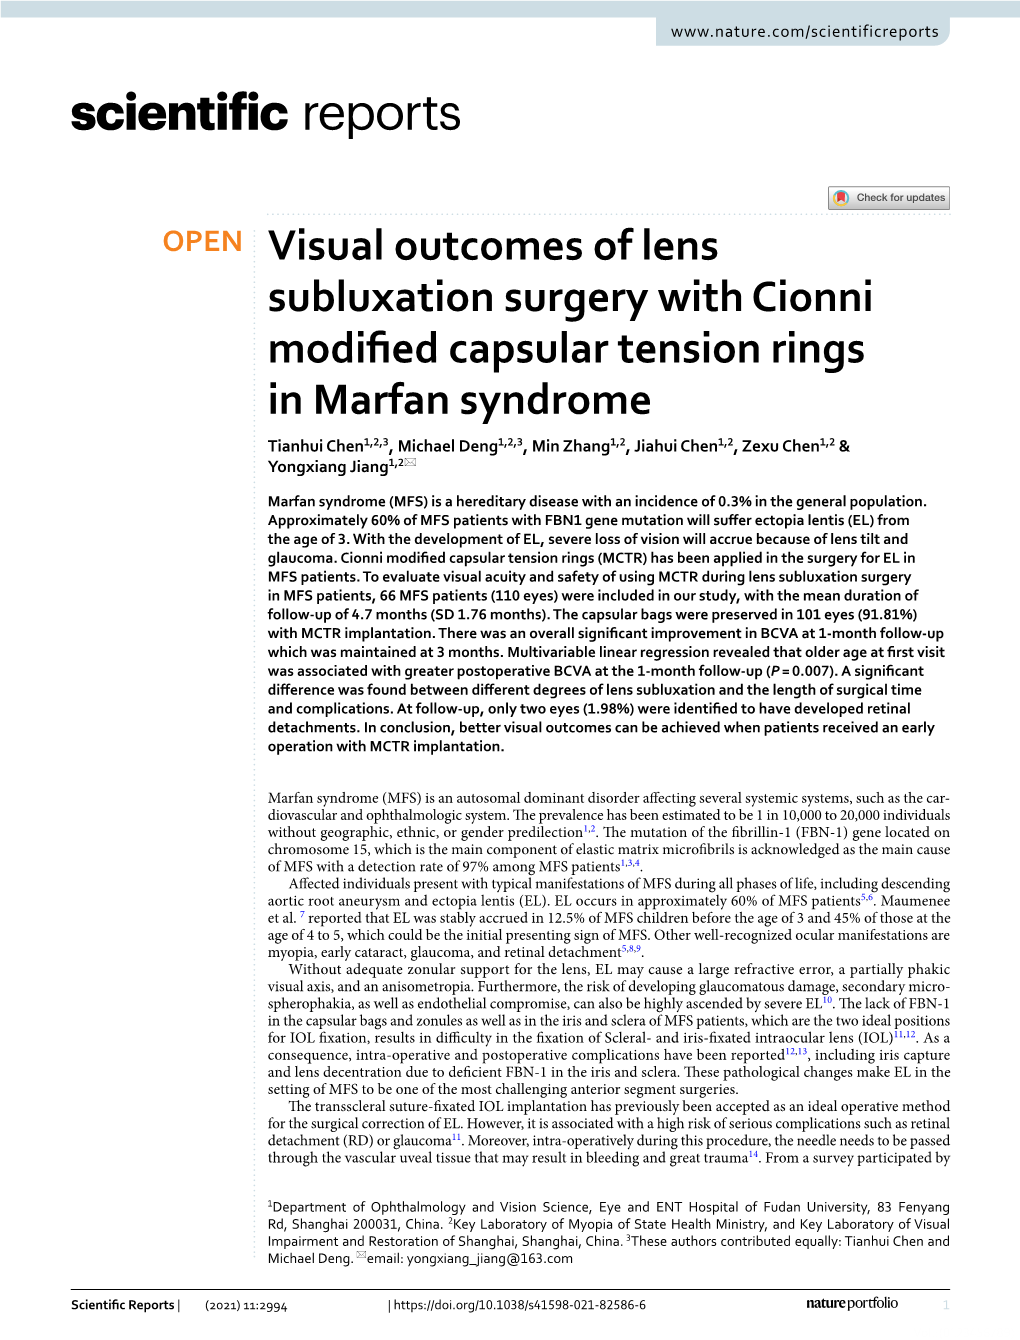 Visual Outcomes of Lens Subluxation Surgery with Cionni Modified Capsular Tension Rings in Marfan Syndrome